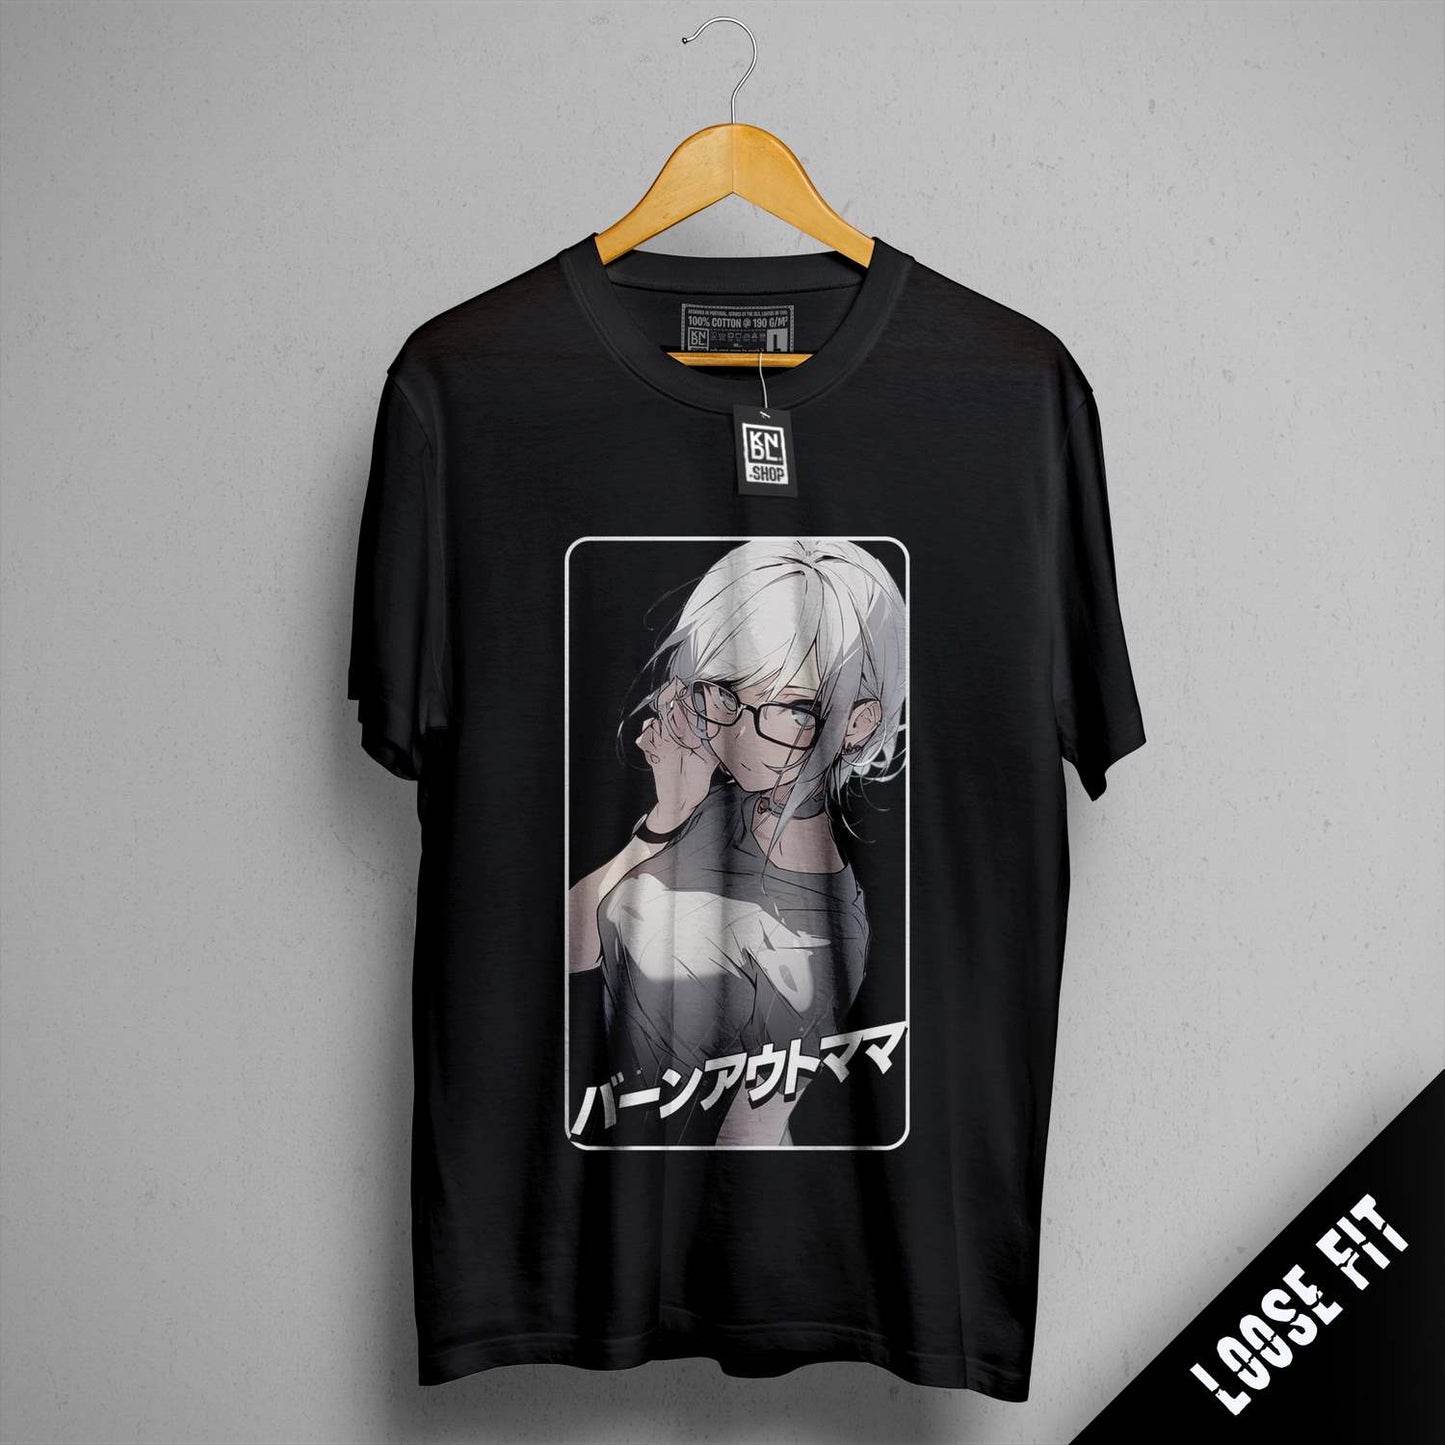 a black tshirt with a picture of an anime character on it